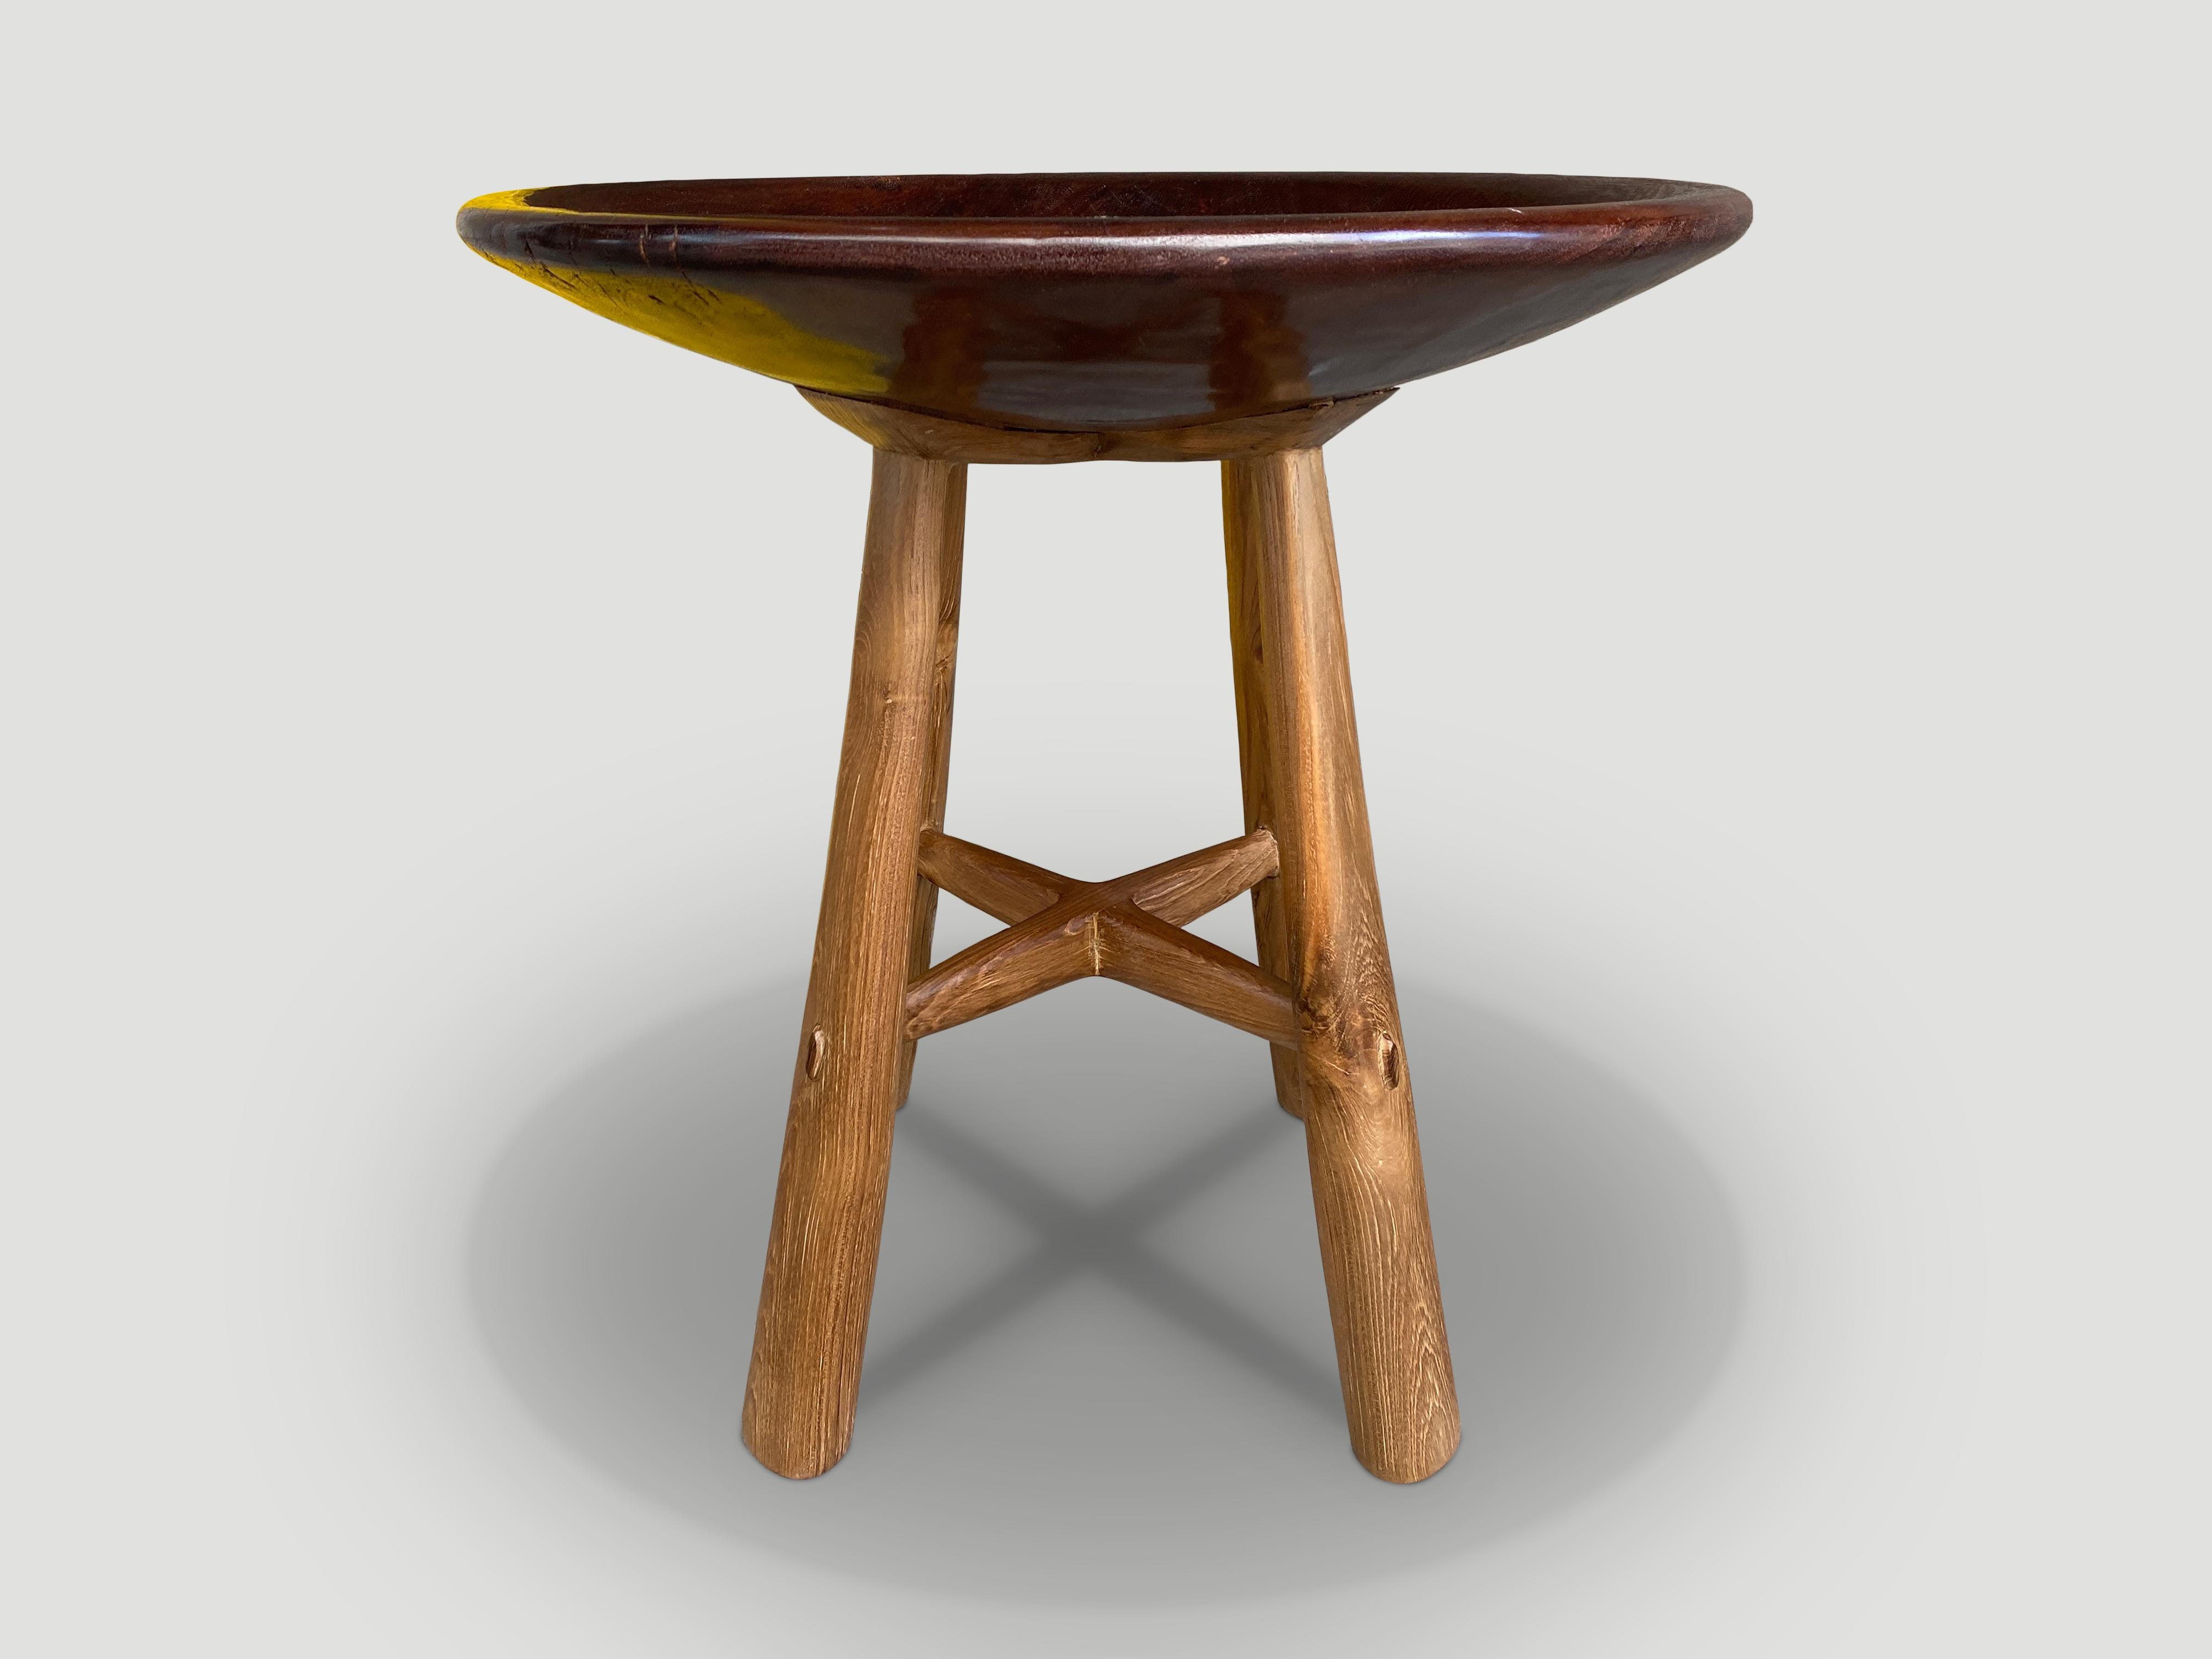 Introducing the mid century Couture Collection. Furniture constructed by hand from start to finish. A beautiful century old Merbau deep wood bowl from Sumatra, is polished with a natural oil revealing the stunning wood grain. We added mid century